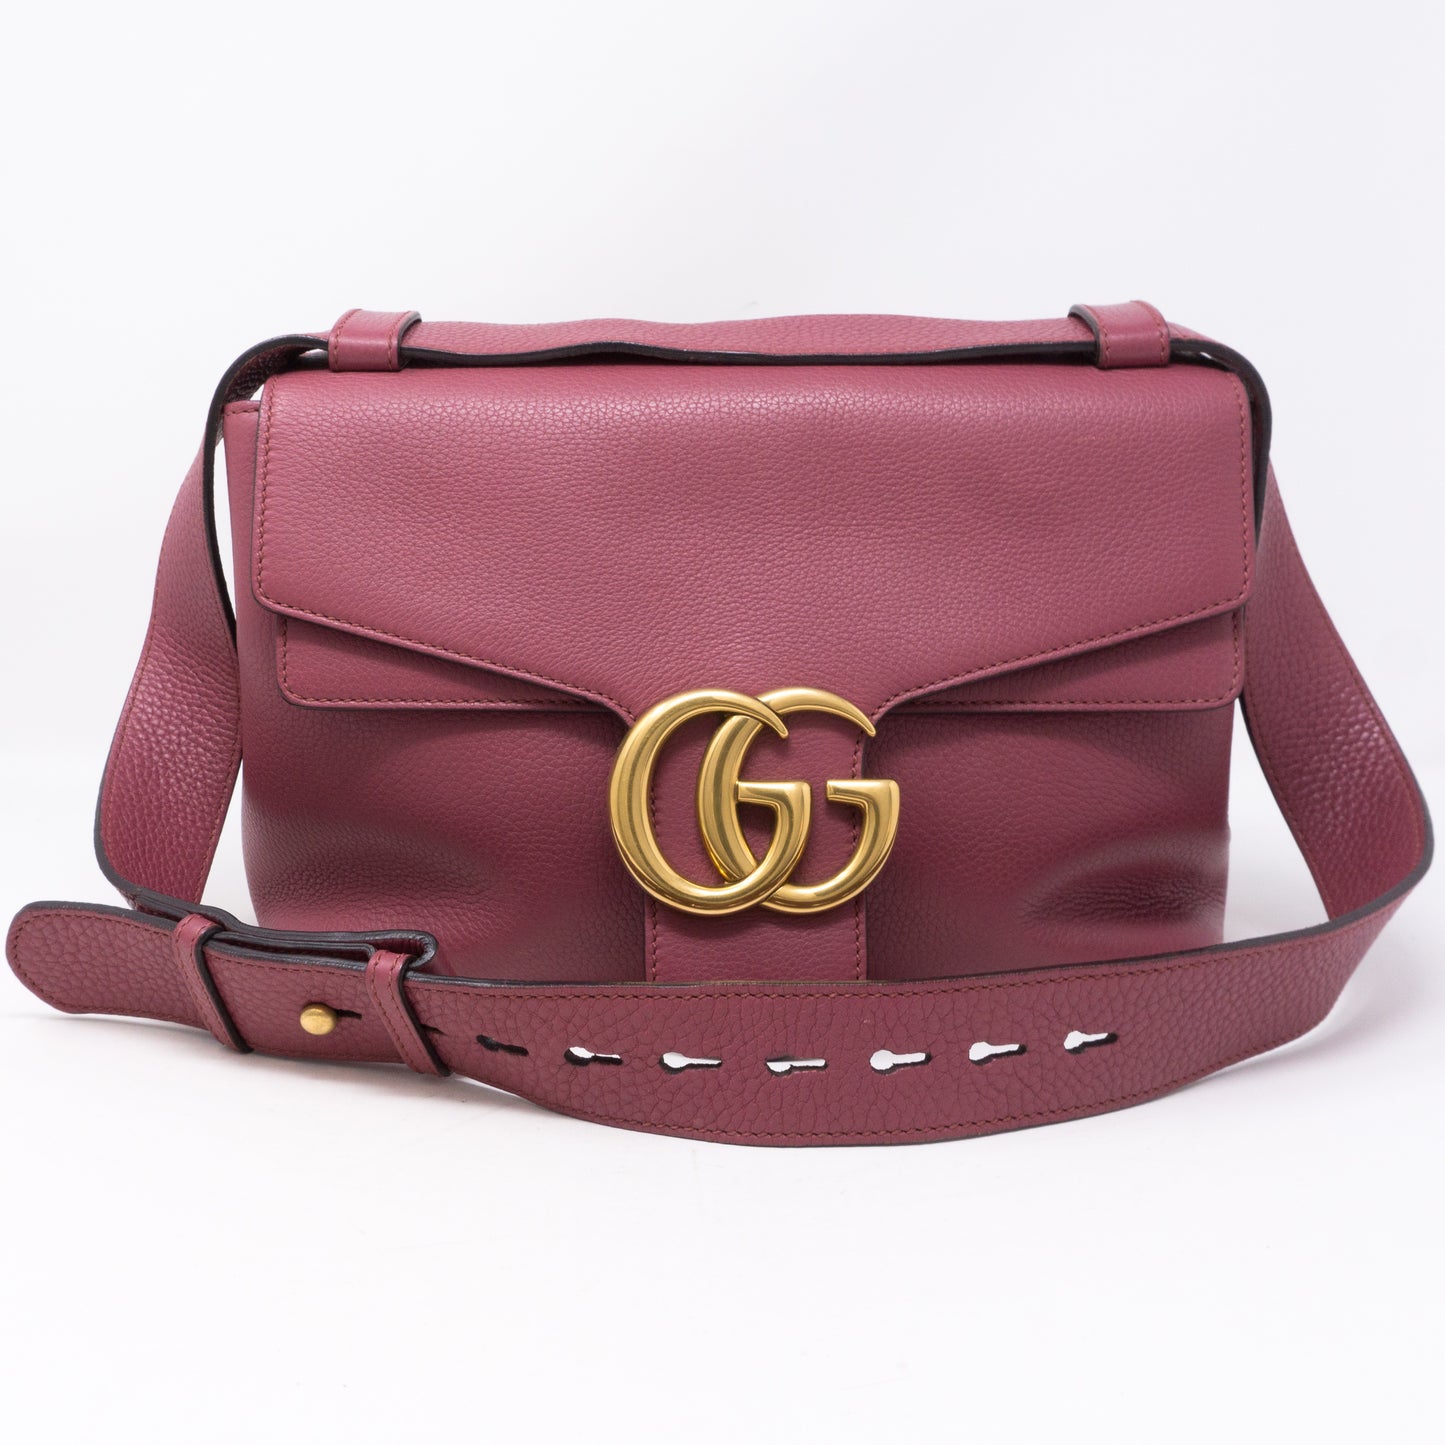 GG Marmont Shoulder Bag Leather Small